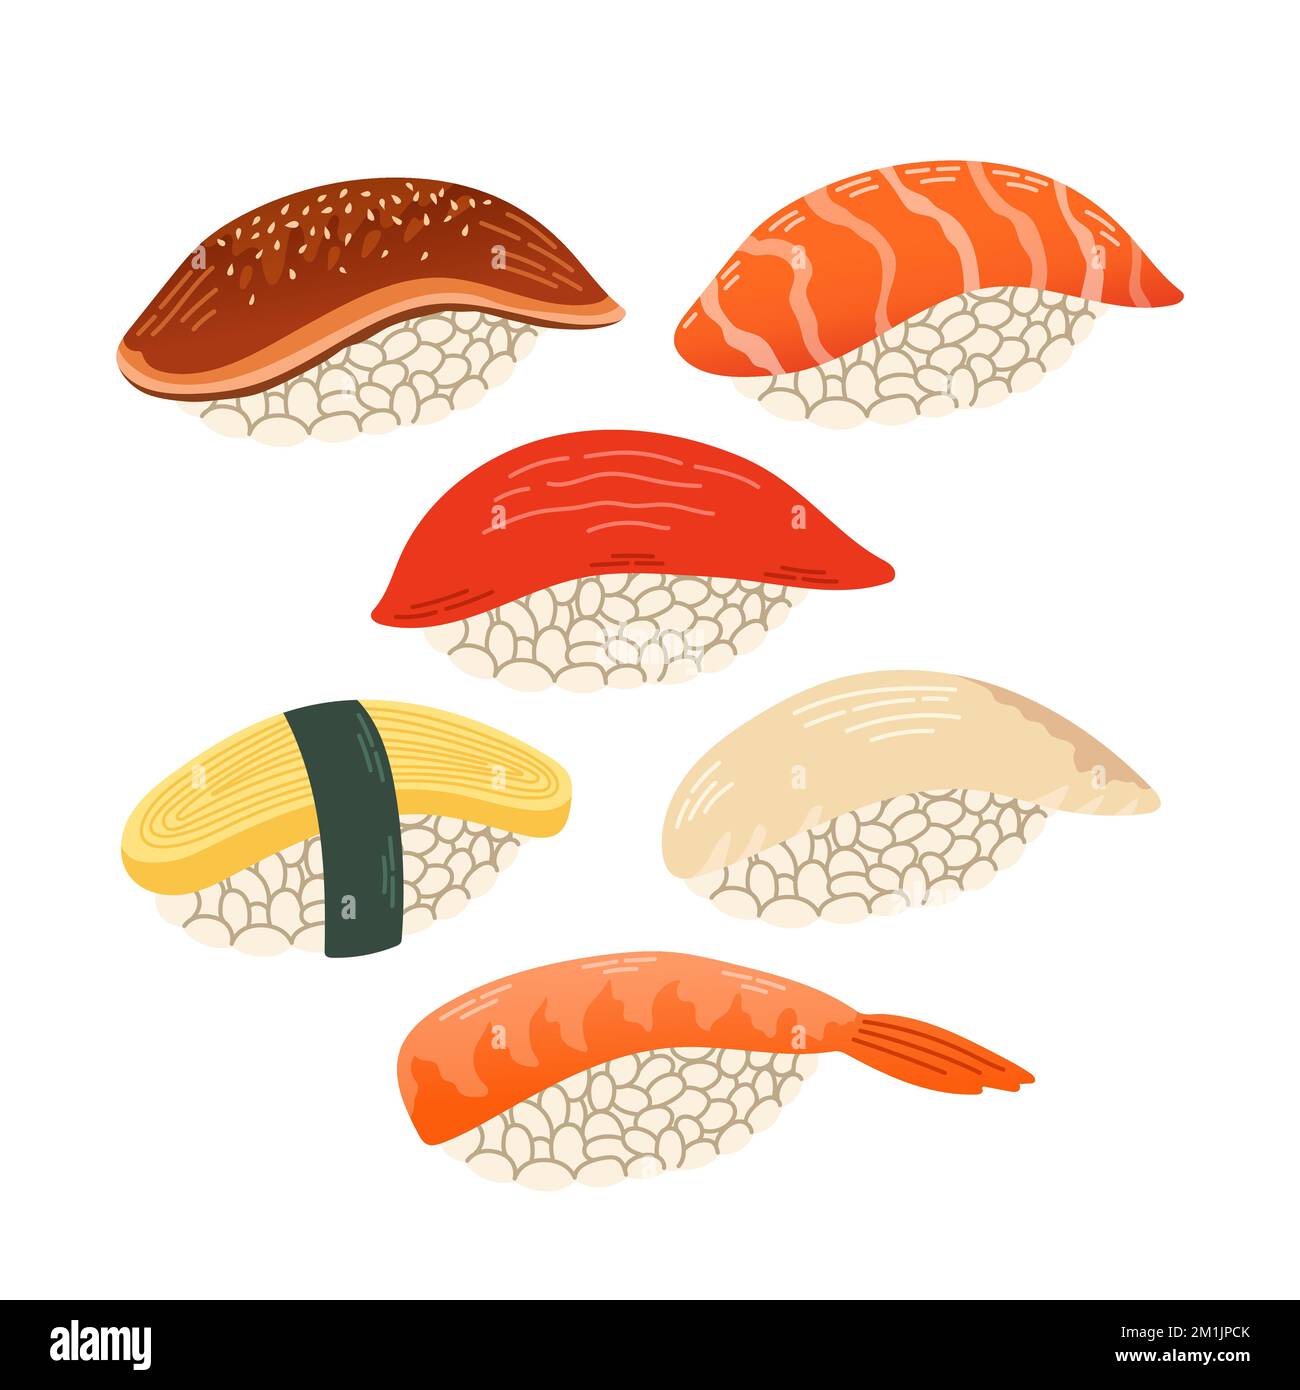 Sushi set japan asian food vector logo design pack isolated on white background Stock Vector